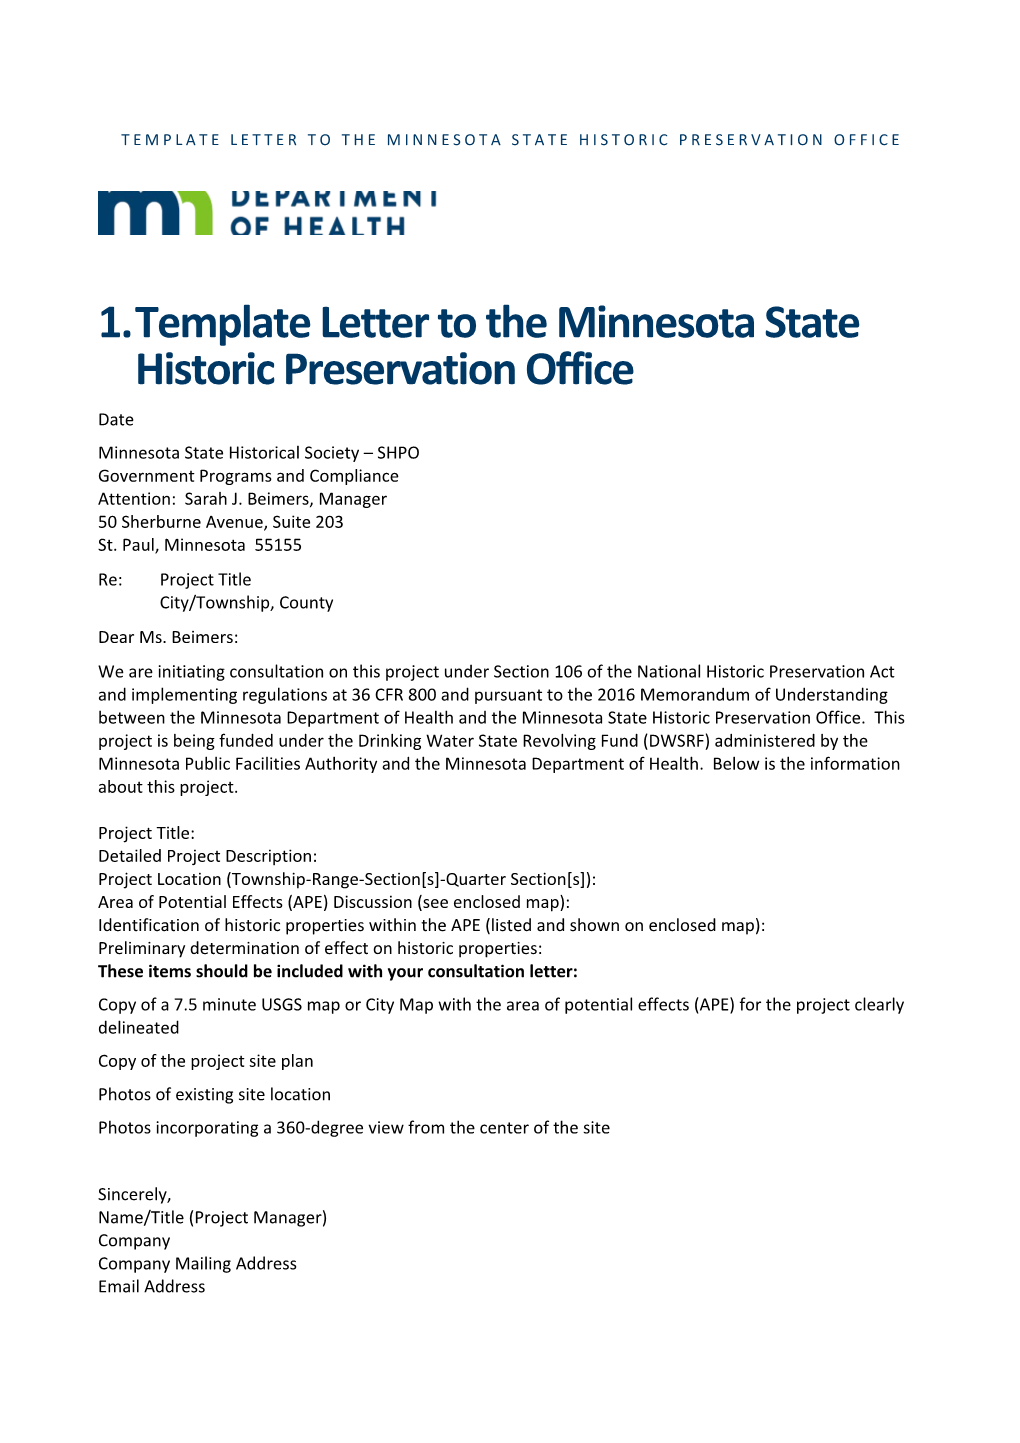 Template Letter to Mnshpo